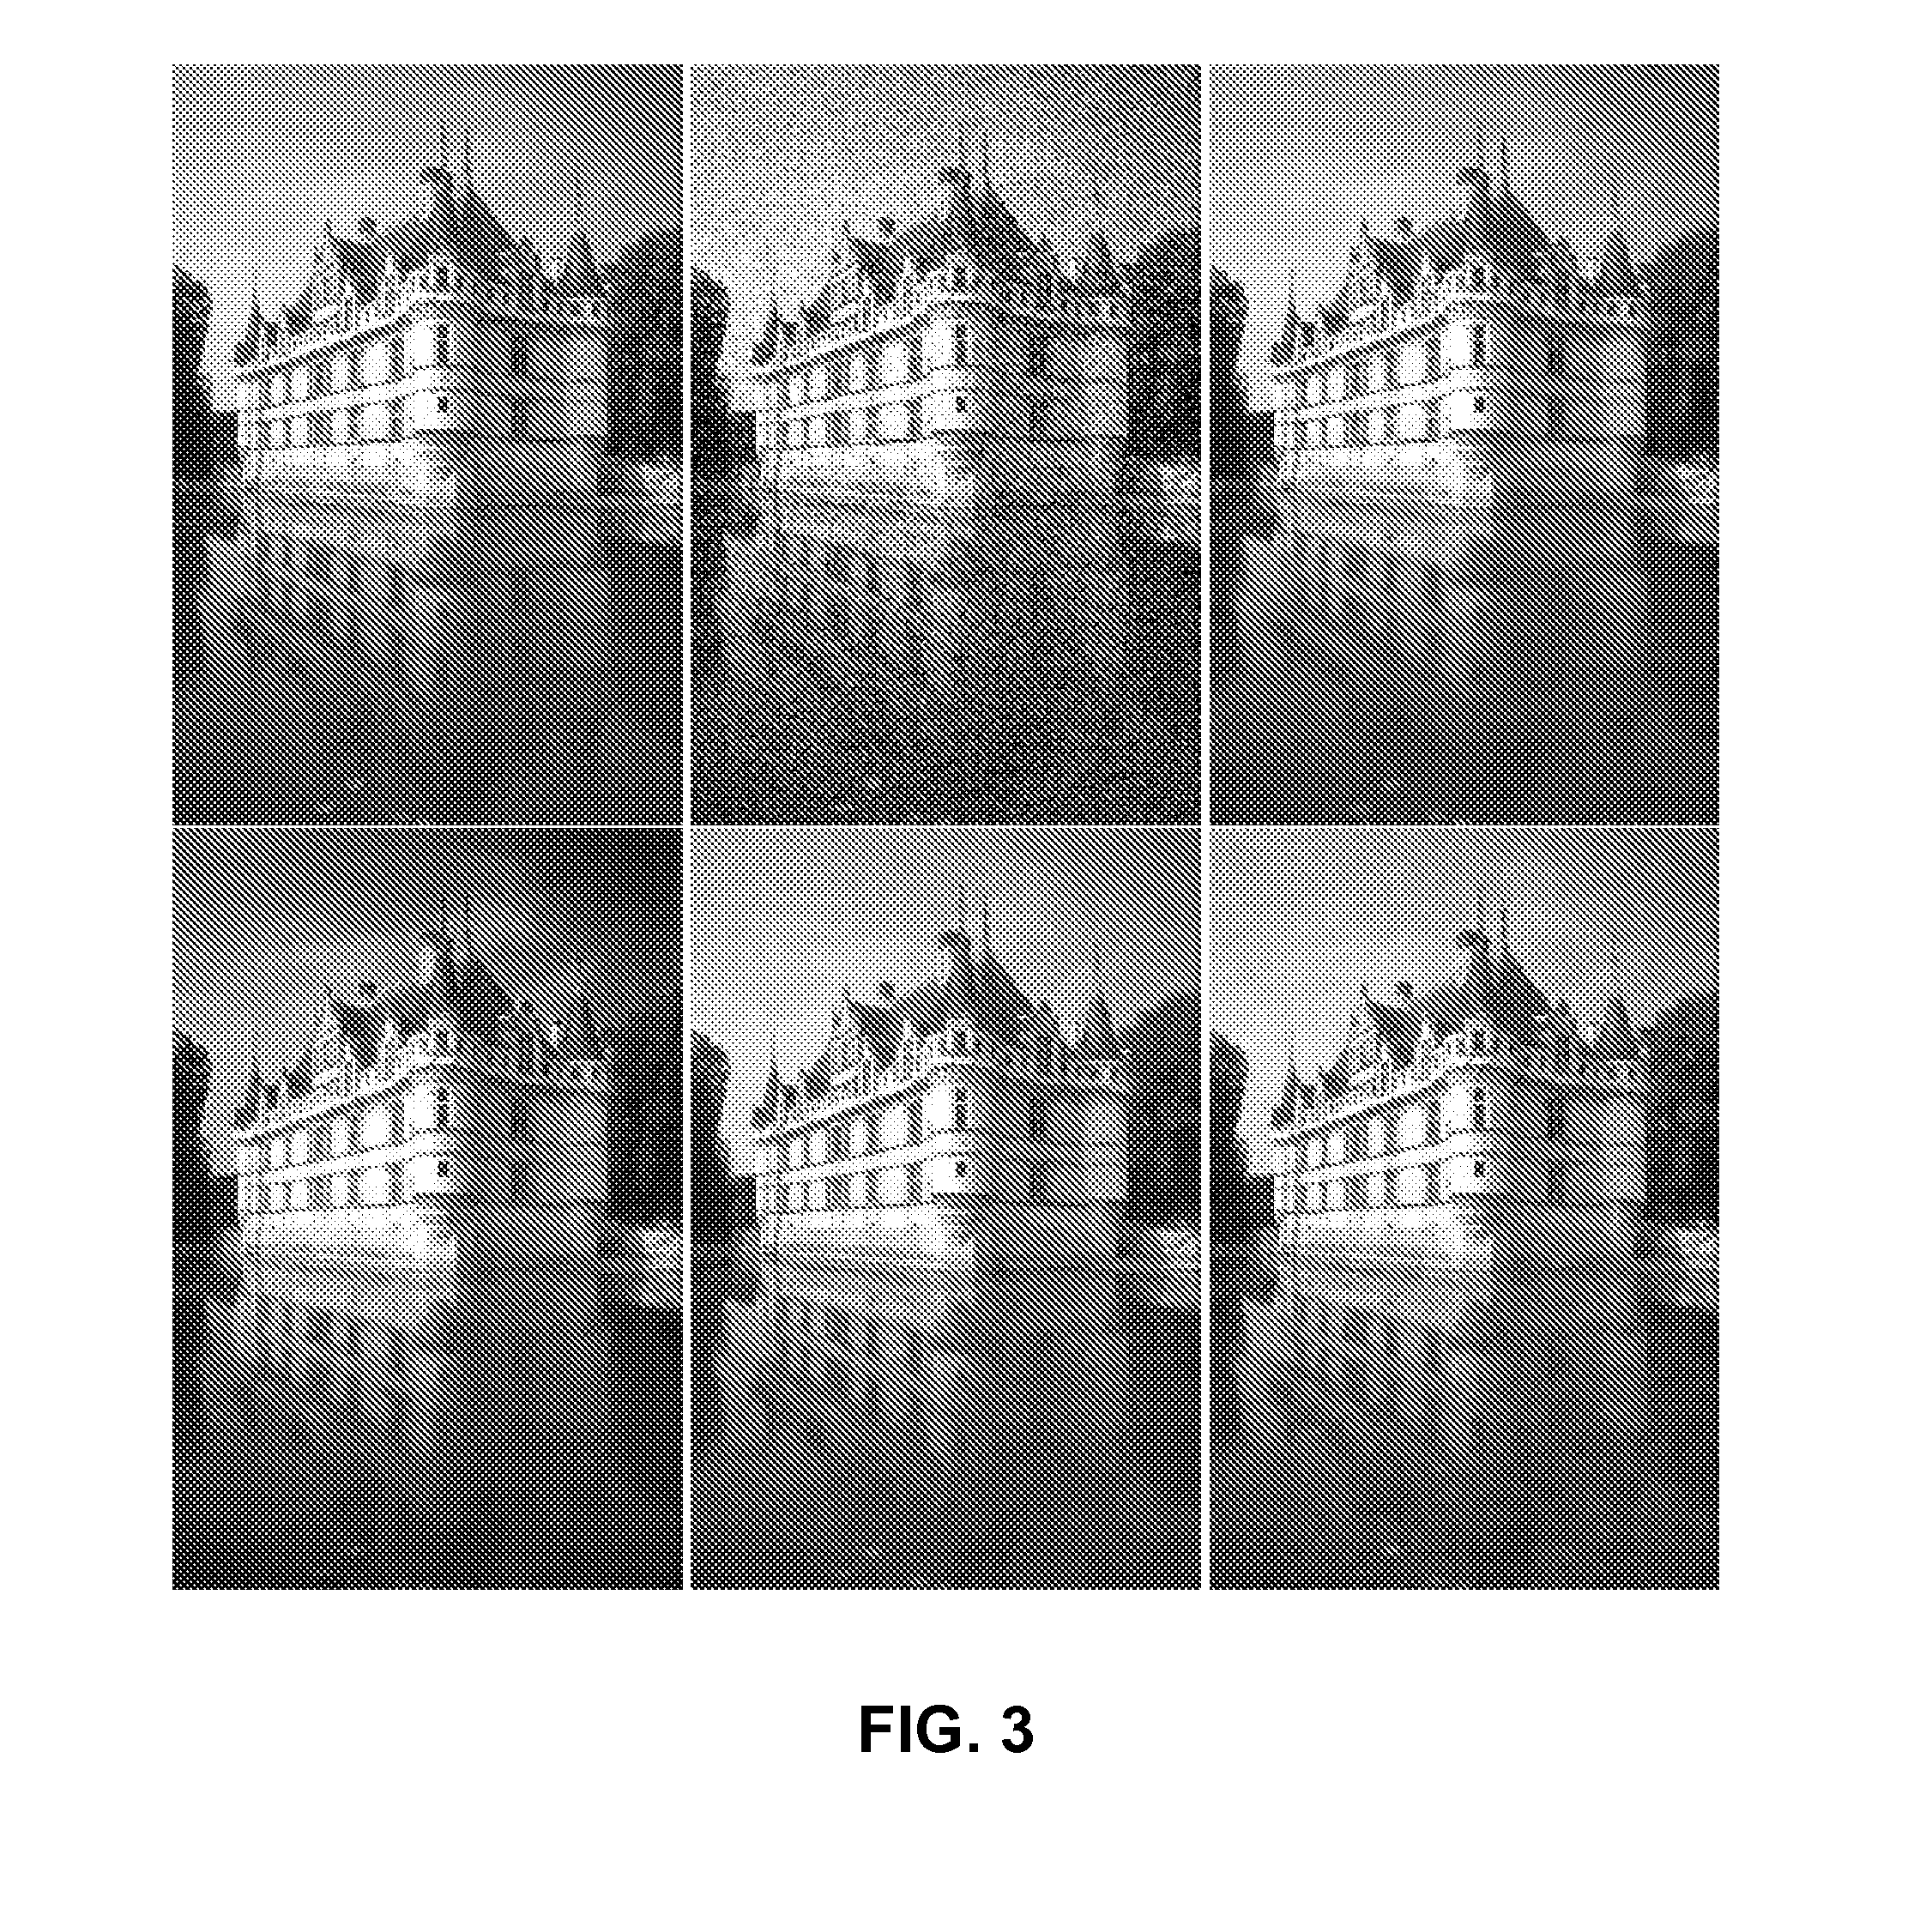 Systems and methods for training an active random field for real-time image denoising